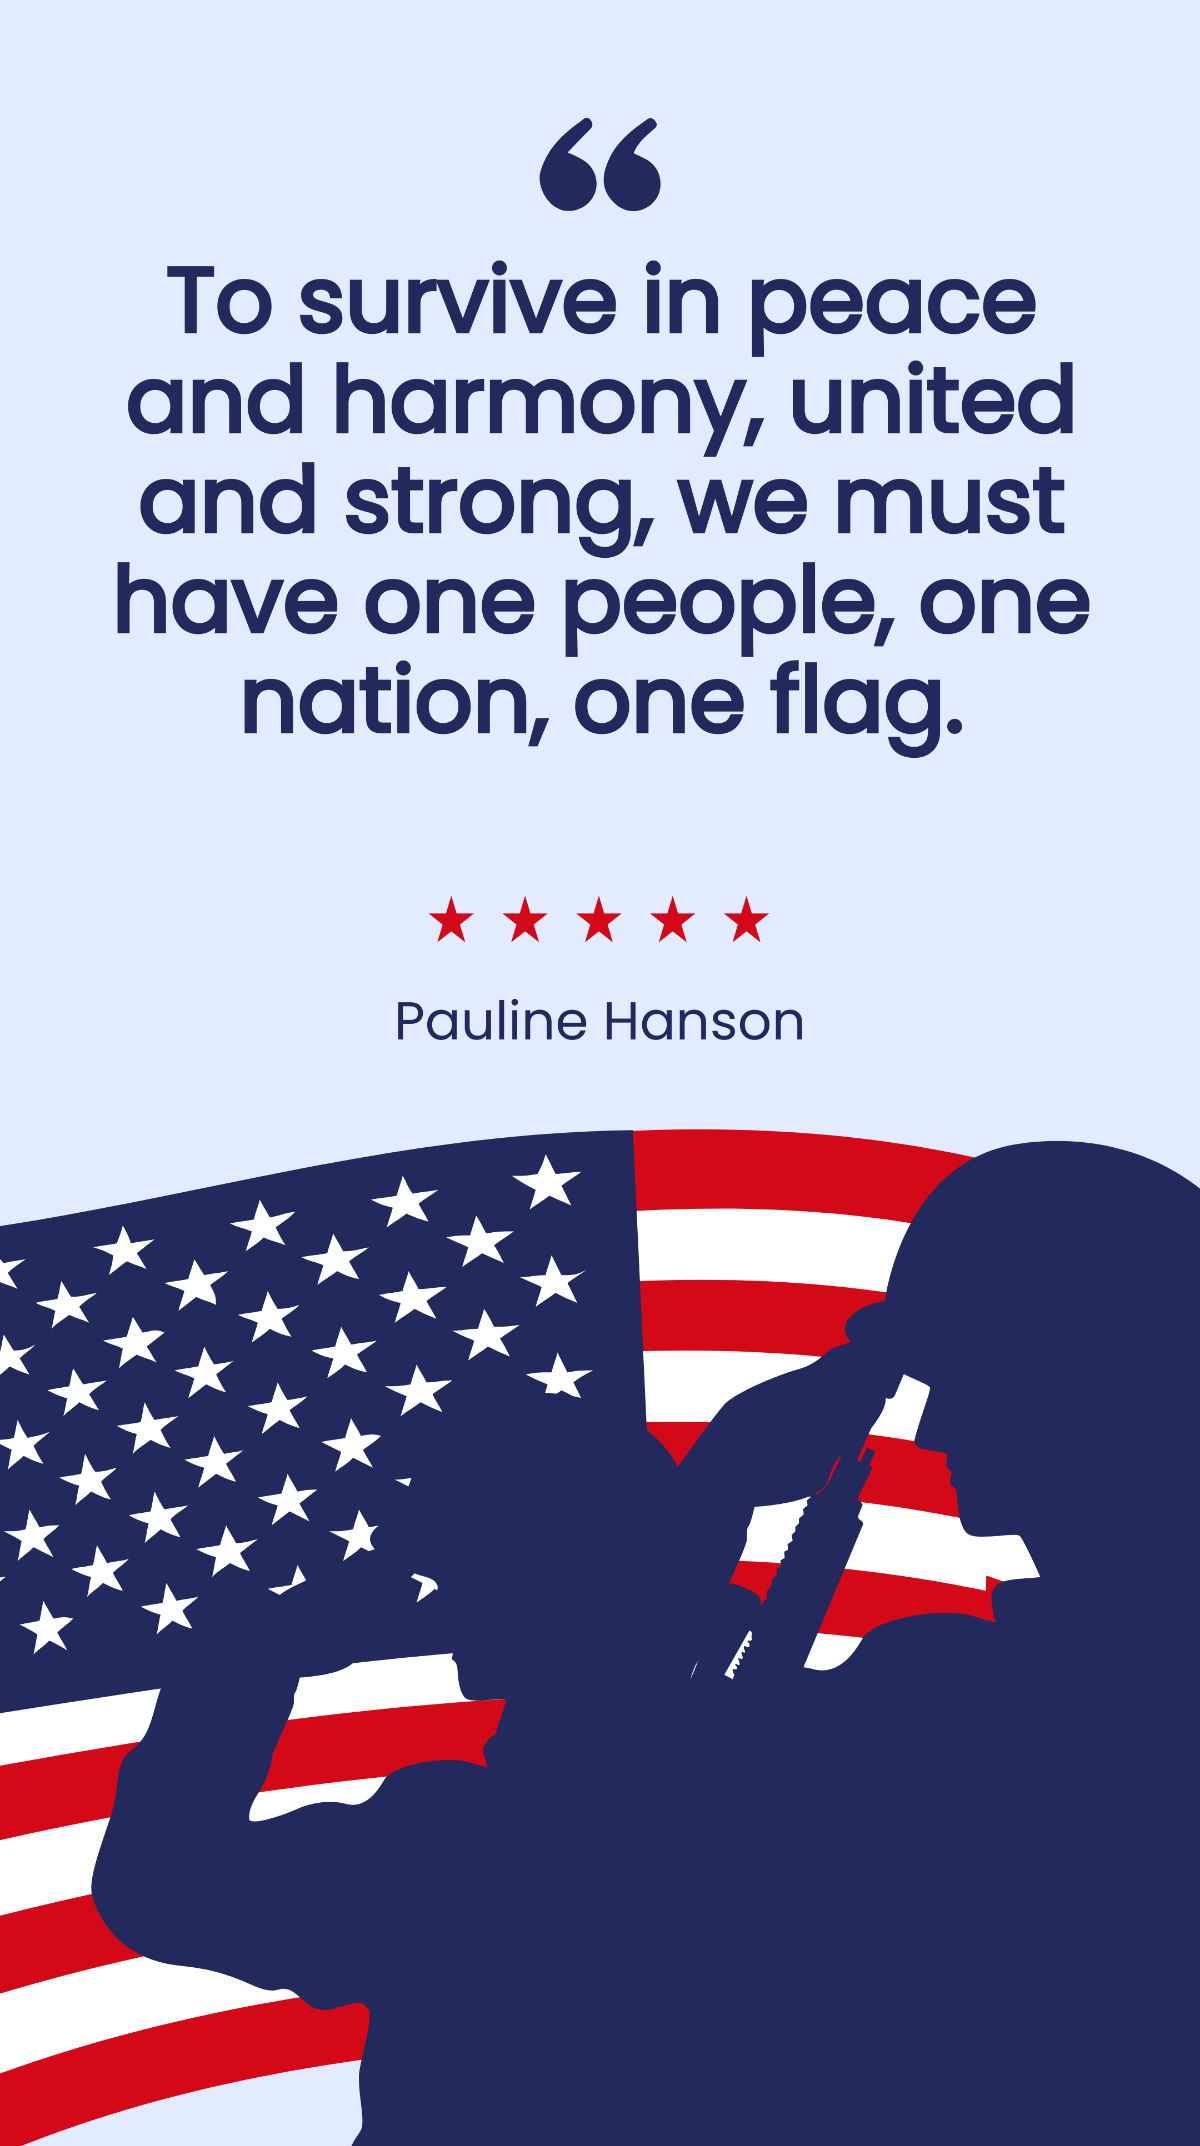 Free Pauline Hanson - To survive in peace and harmony, united and strong, we must have one people, one nation, one flag. Template